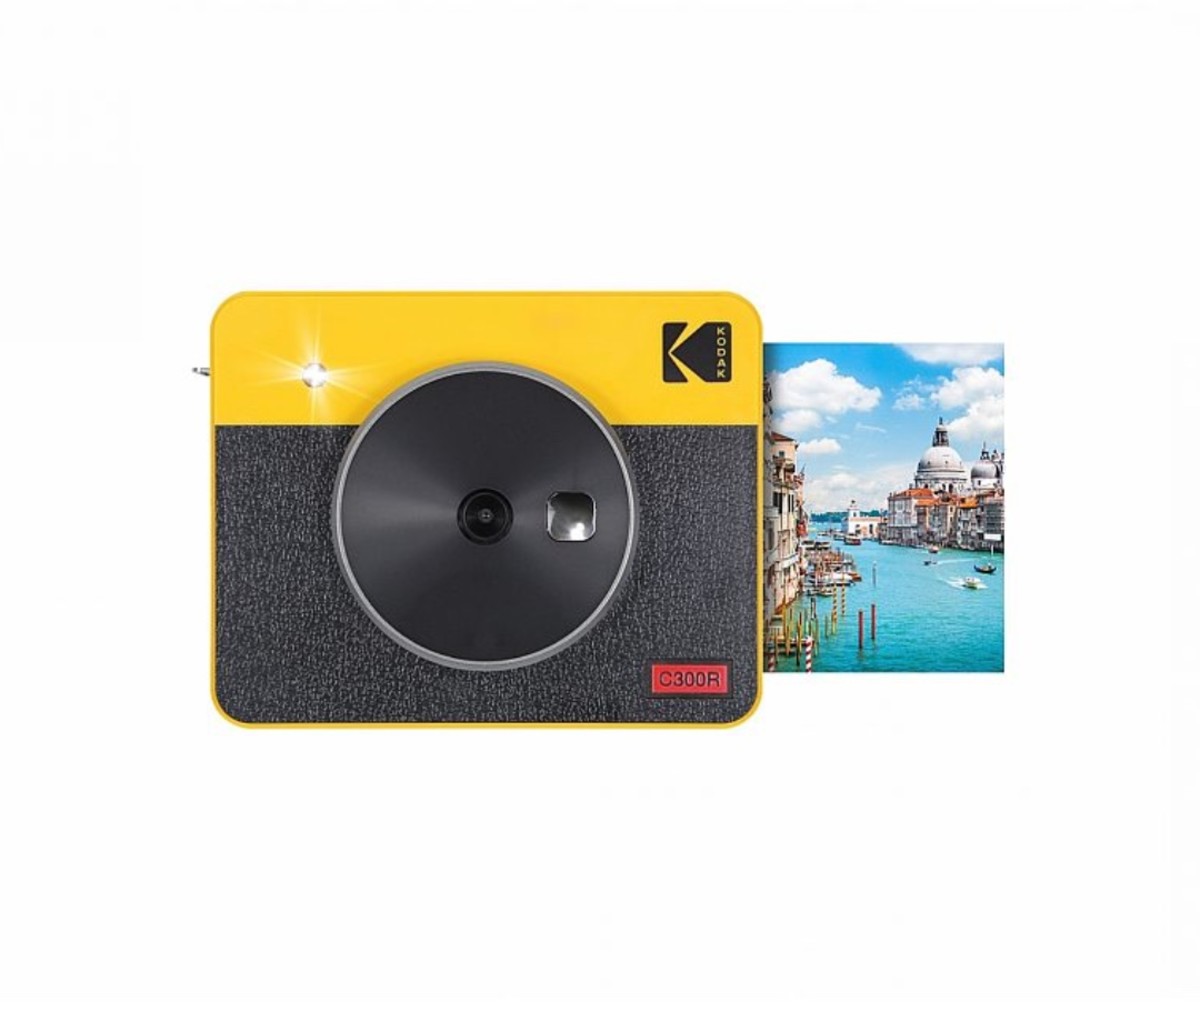 Have snappy fun with the Kodak Mini Shot camera and instant printer.